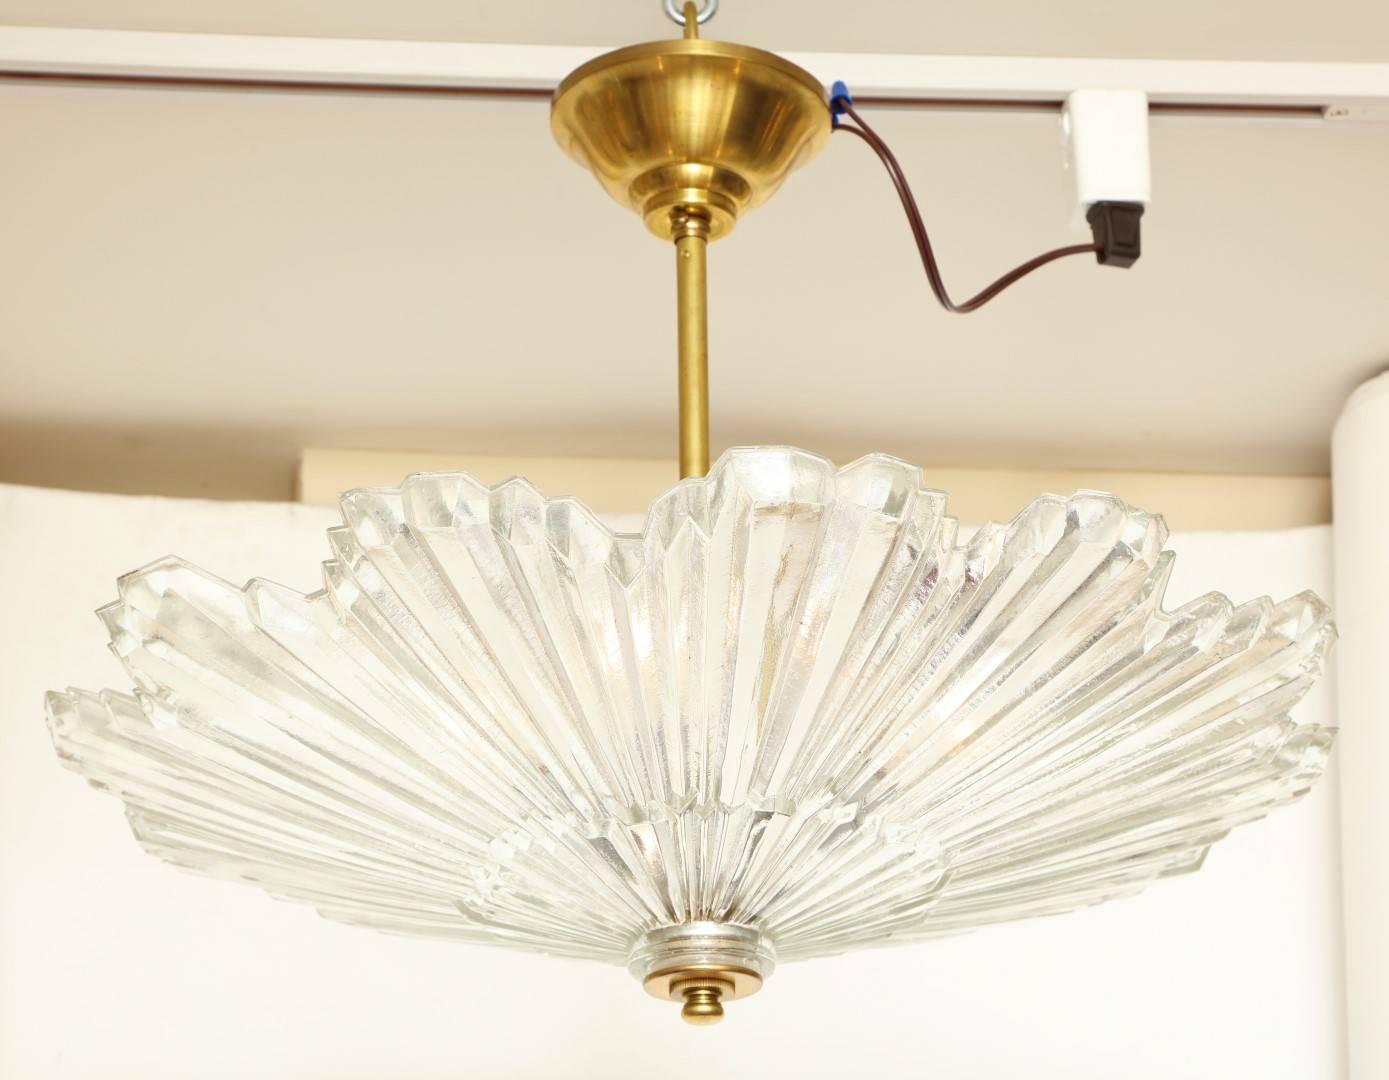 A Caldwell scalloped edged glass sunburst ceiling light with ridged vertical lines suggesting sunrays, the glass interior to diffuse three candelabrum sockets (Two Available).